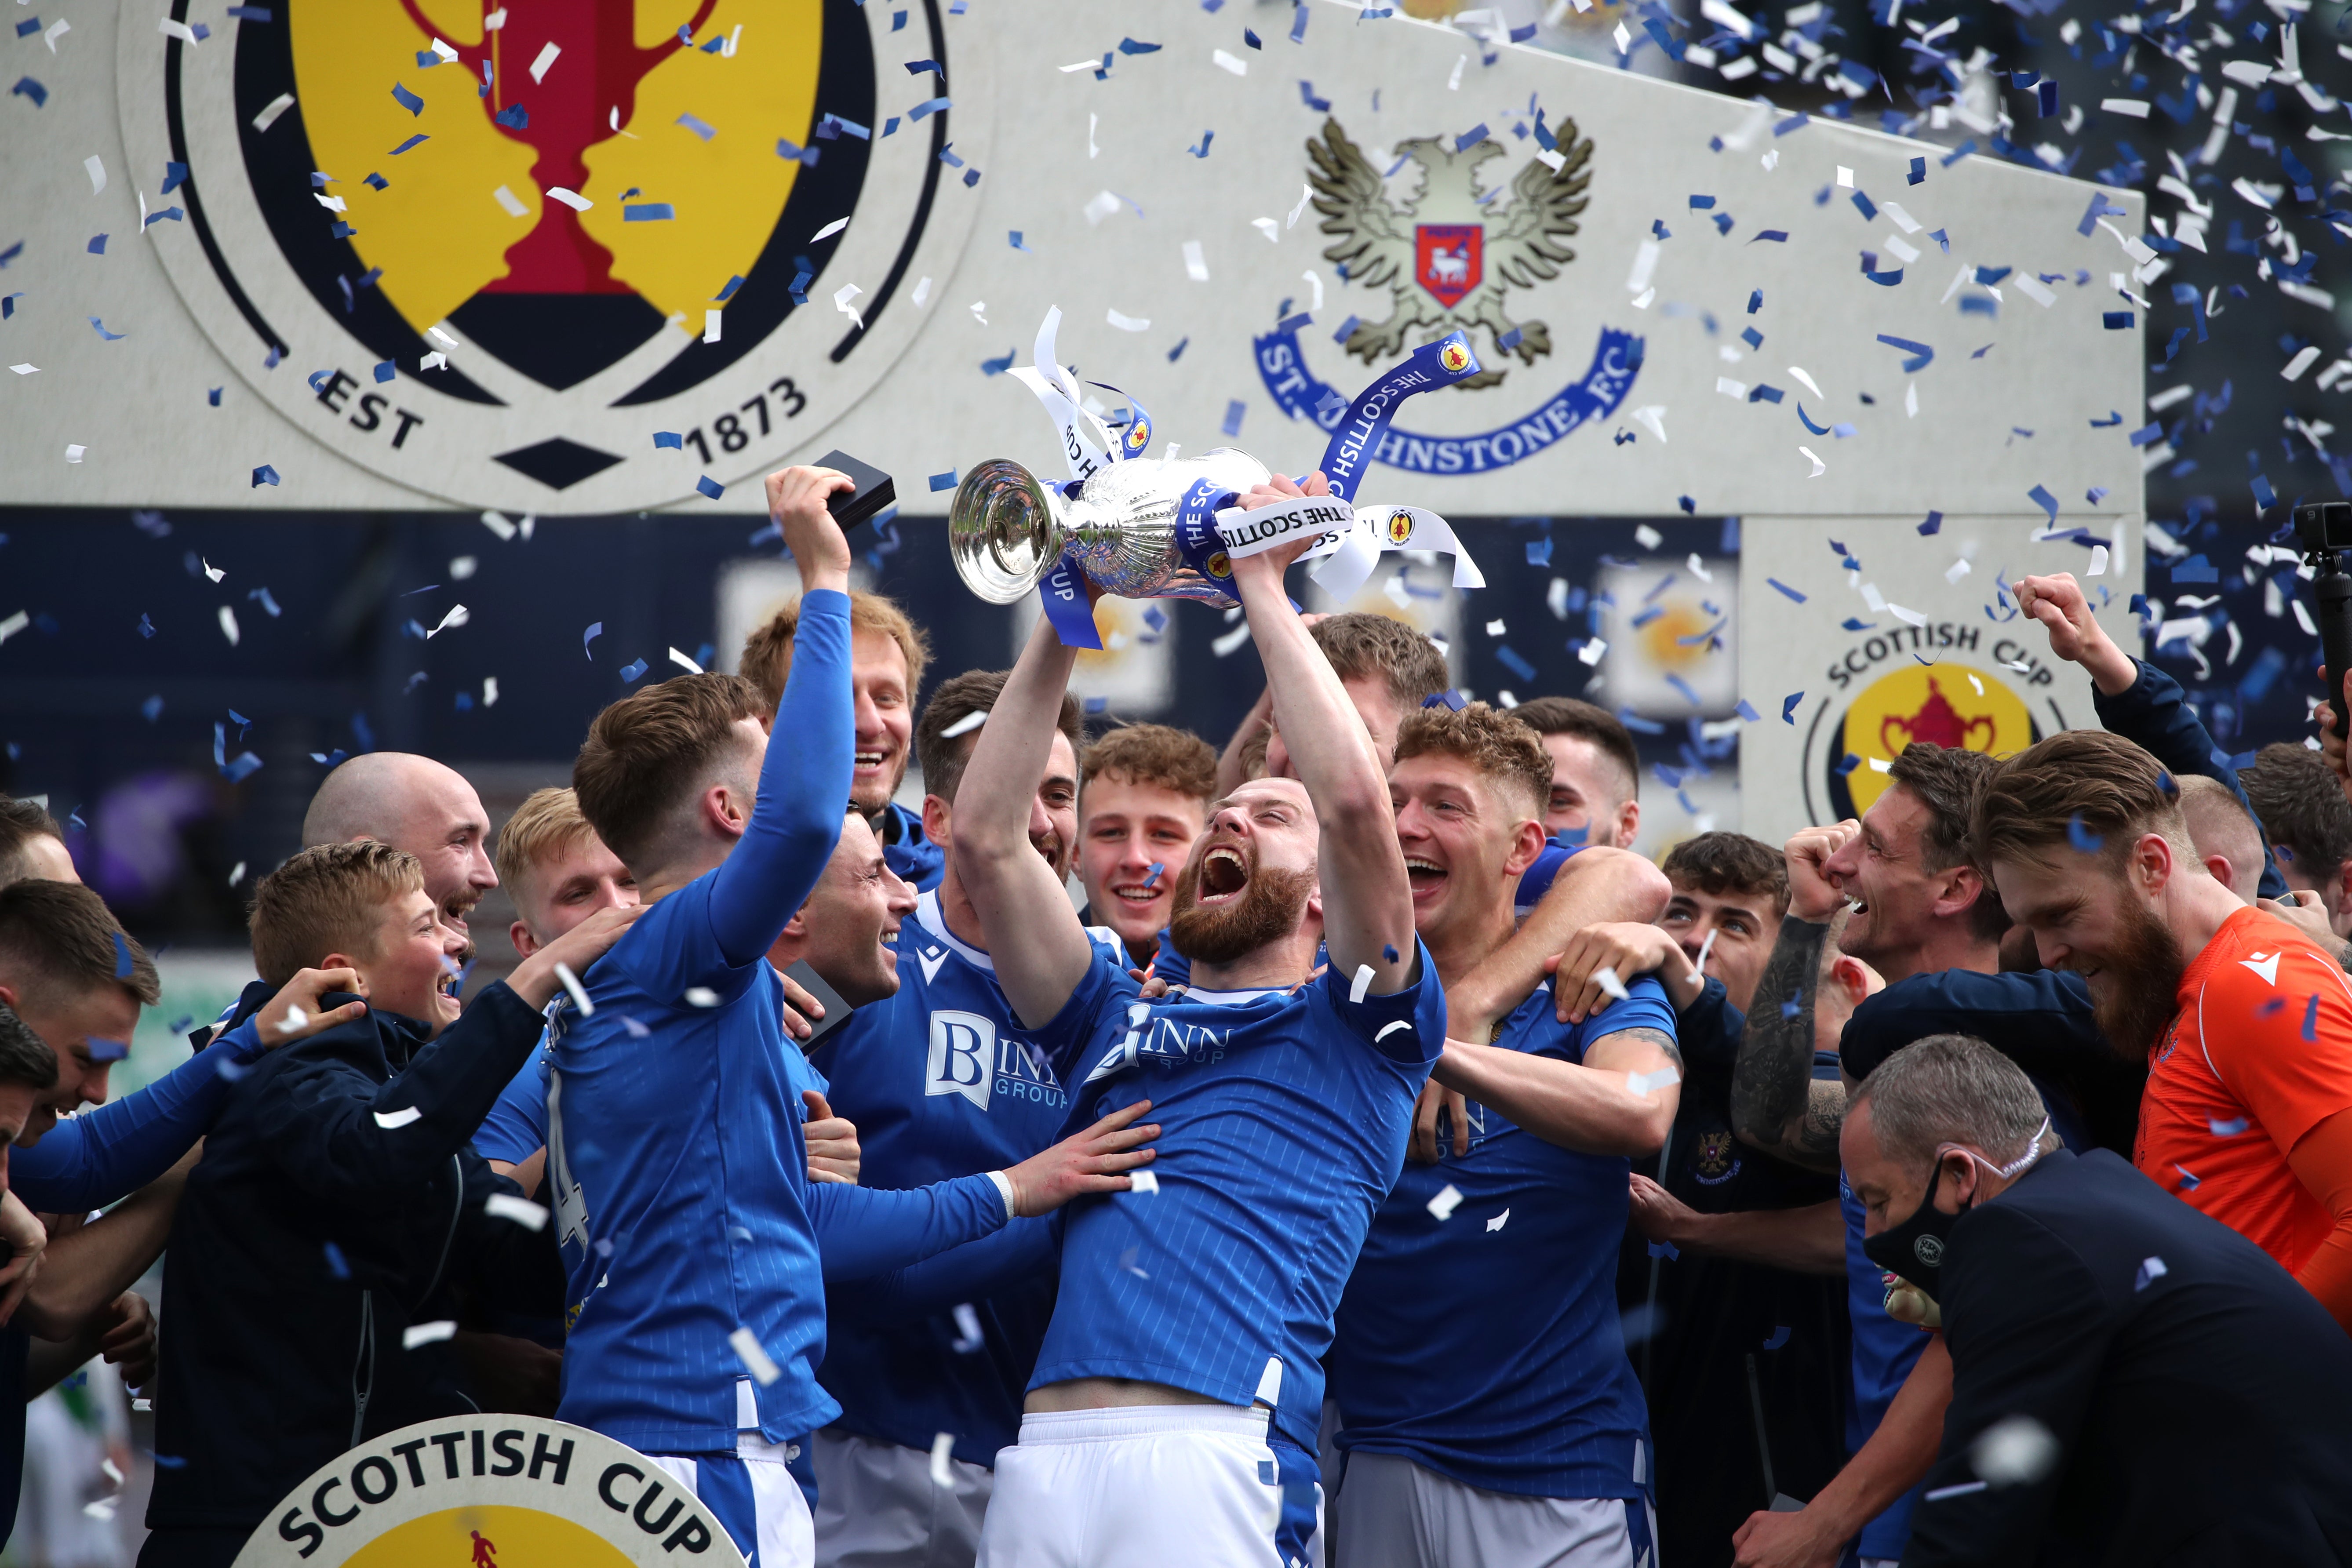 St Johnstone’s Shaun Rooney lifts the Scottish Cup (Andrew Milligan/PA)